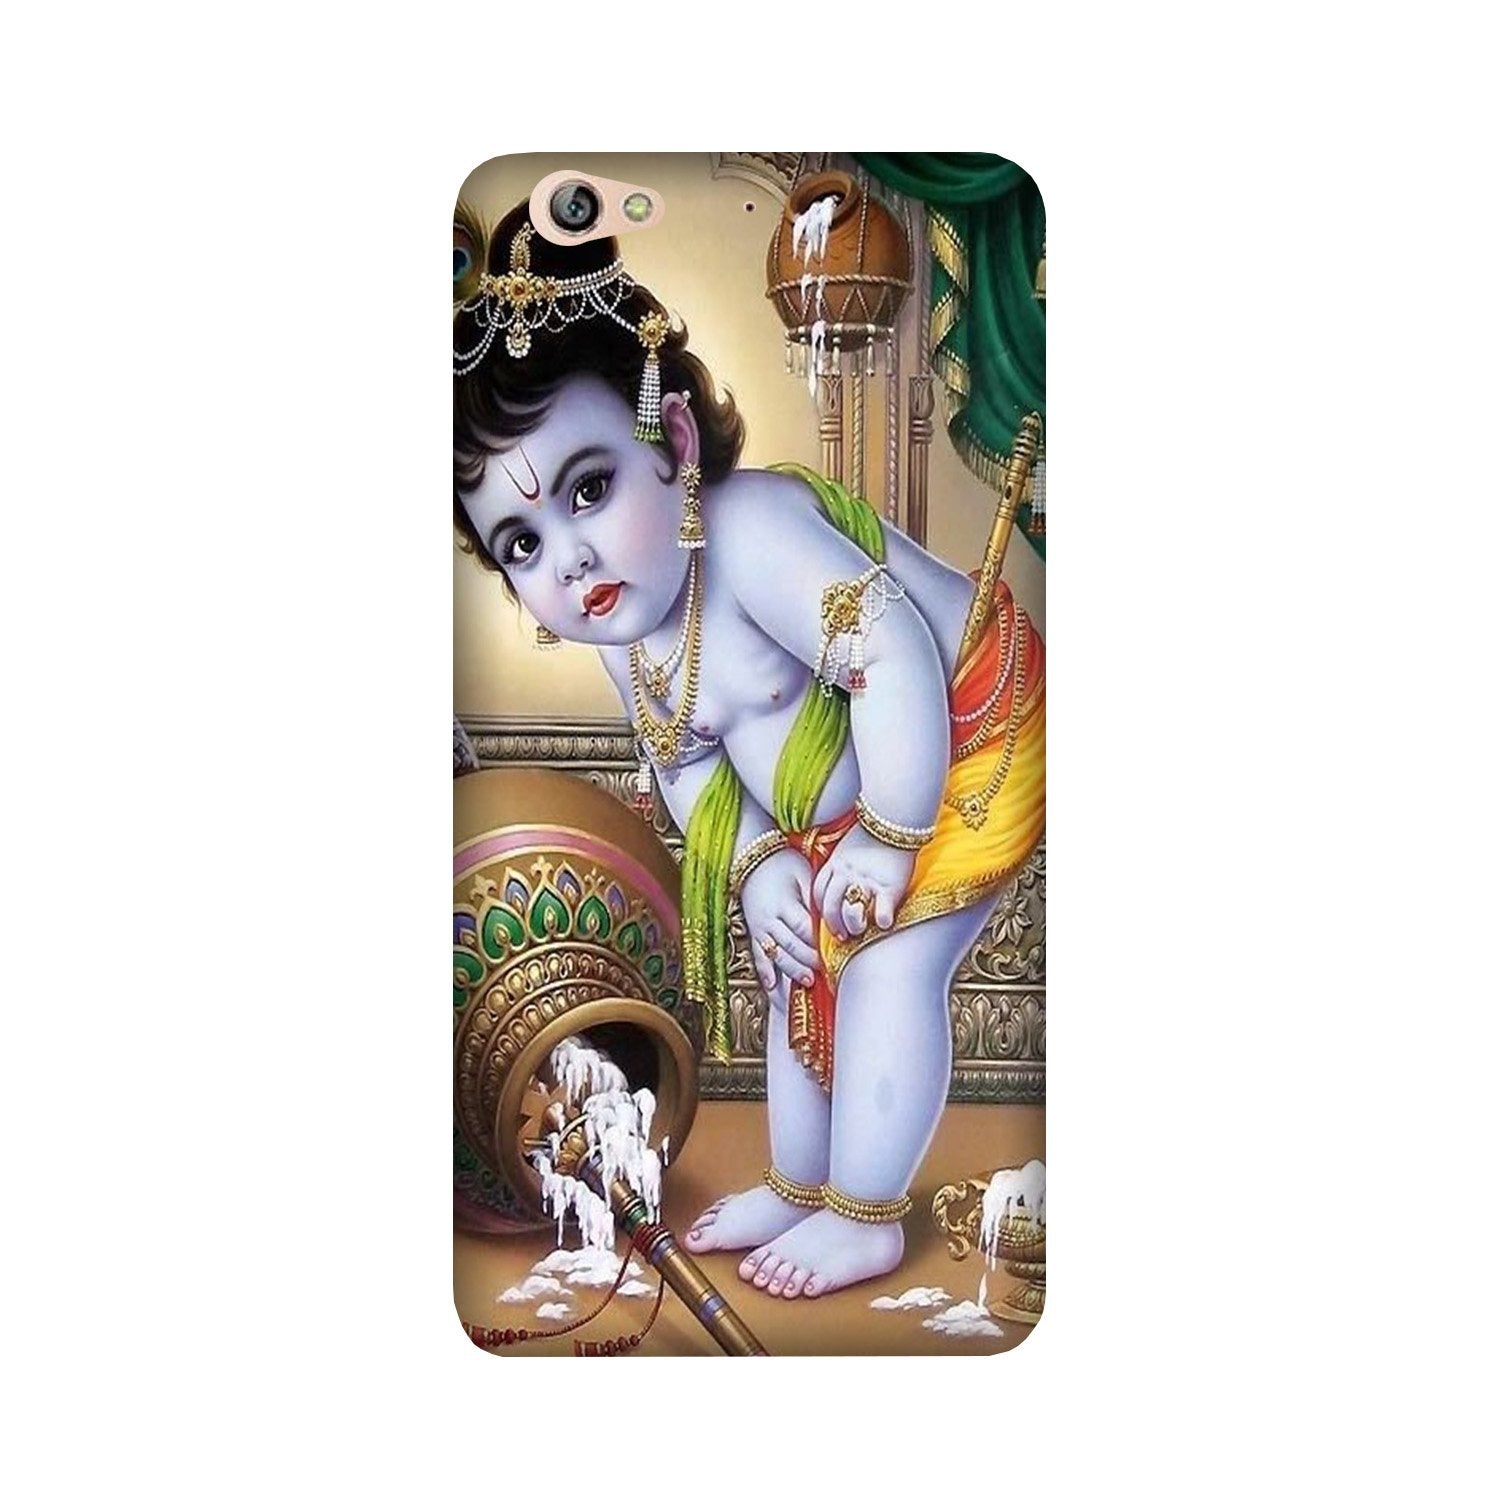 Bal Gopal2 Case for Gionee S6